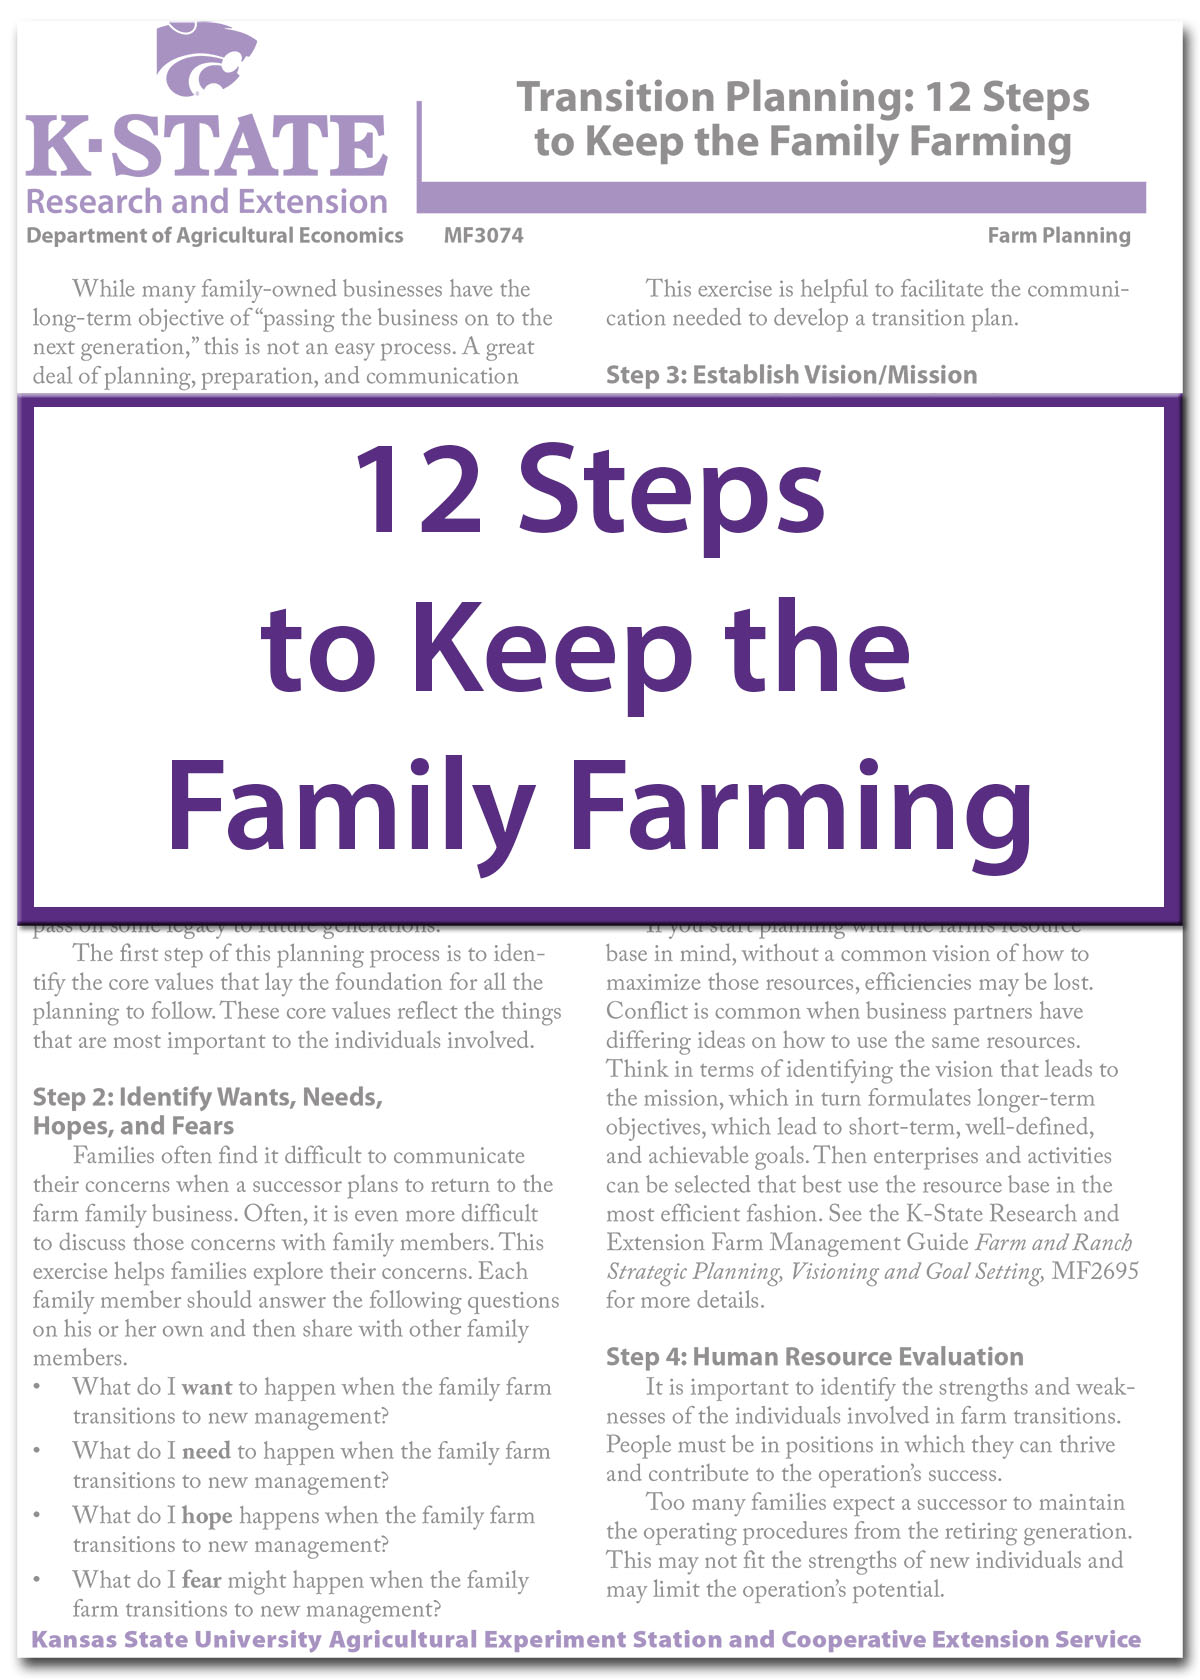 12 Steps to Keep the Family Farming